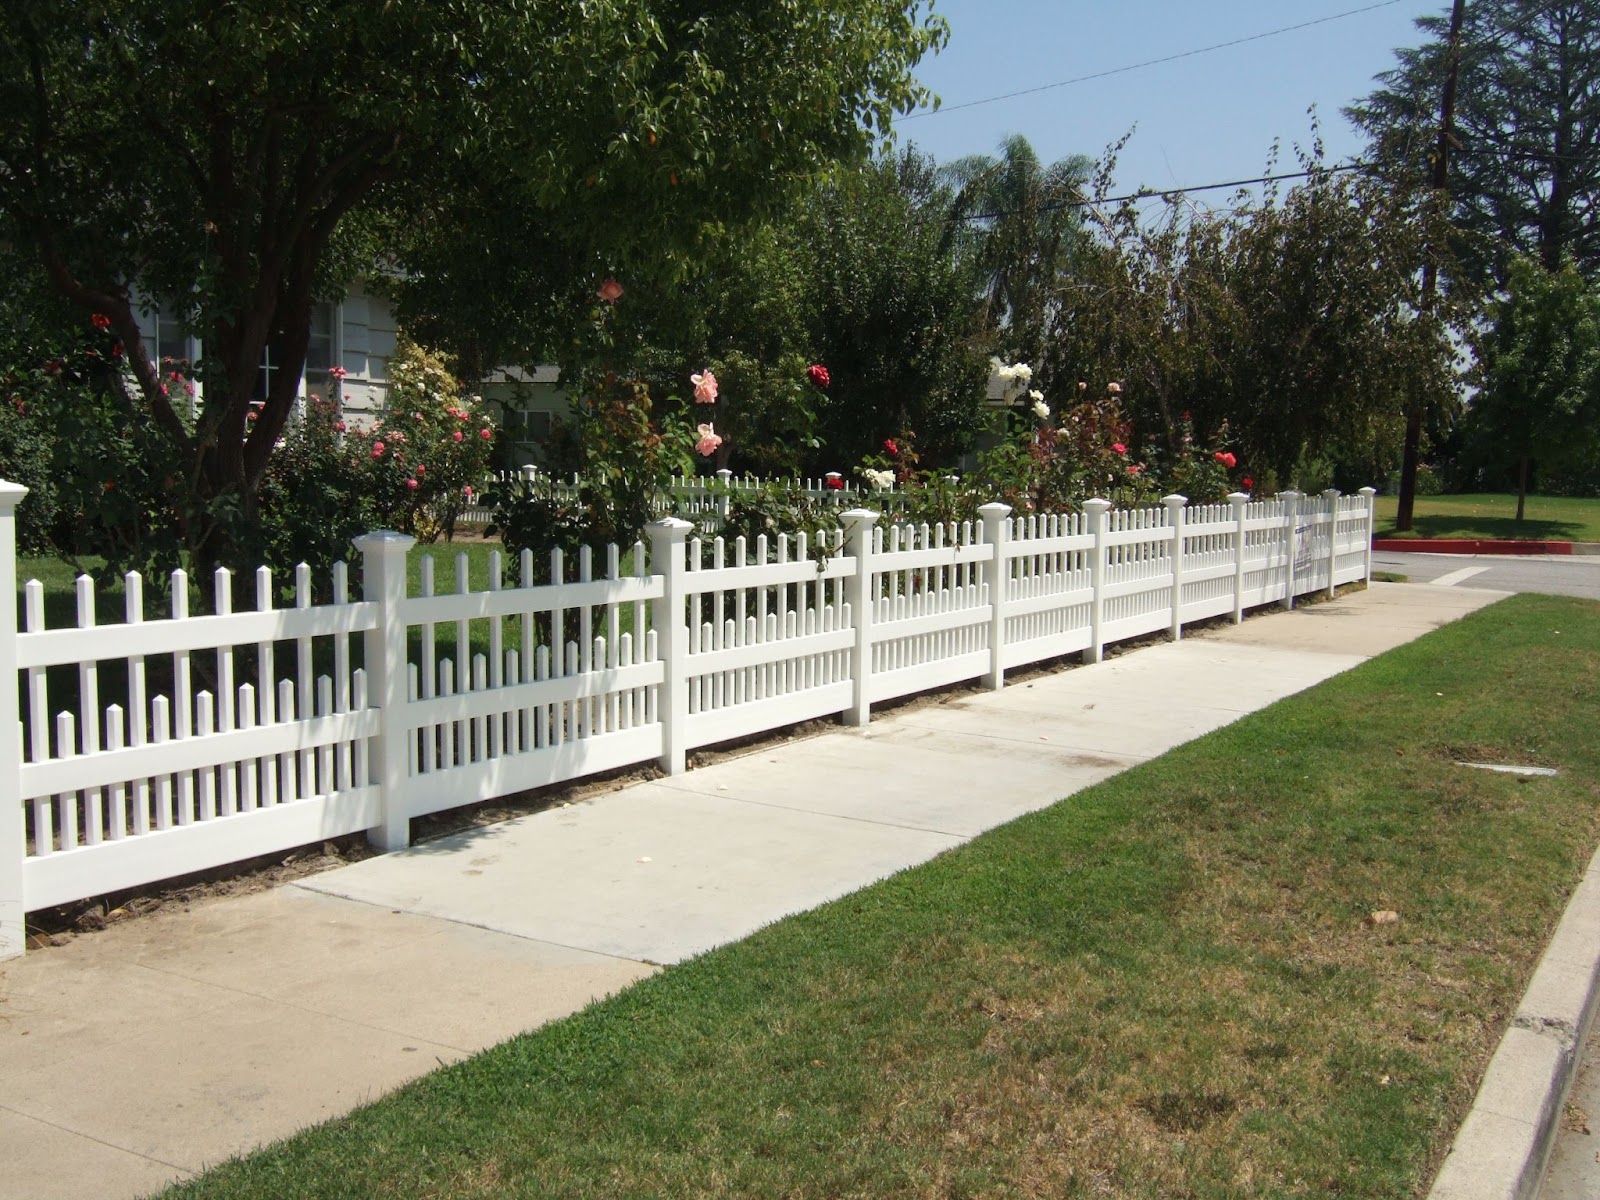 high-quality American made vinyl picket fencing